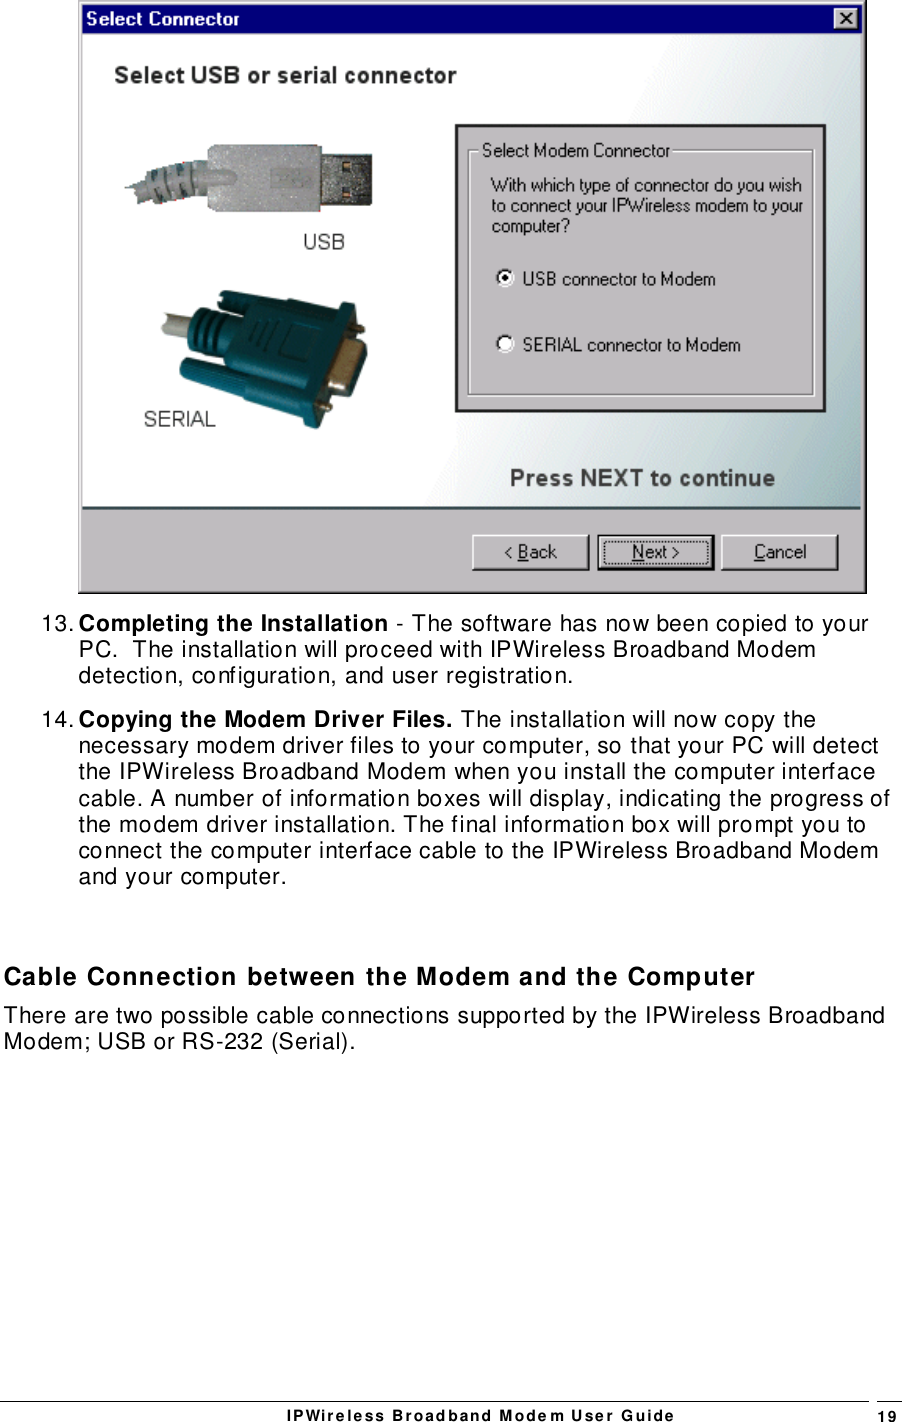 IPWireless Broadband Modem User Guide 1913. Completing the Installation - The software has now been copied to yourPC.  The installation will proceed with IPWireless Broadband Modemdetection, configuration, and user registration.14. Copying the Modem Driver Files. The installation will now copy thenecessary modem driver files to your computer, so that your PC will detectthe IPWireless Broadband Modem when you install the computer interfacecable. A number of information boxes will display, indicating the progress ofthe modem driver installation. The final information box will prompt you toconnect the computer interface cable to the IPWireless Broadband Modemand your computer.Cable Connection between the Modem and the ComputerThere are two possible cable connections supported by the IPWireless BroadbandModem; USB or RS-232 (Serial).